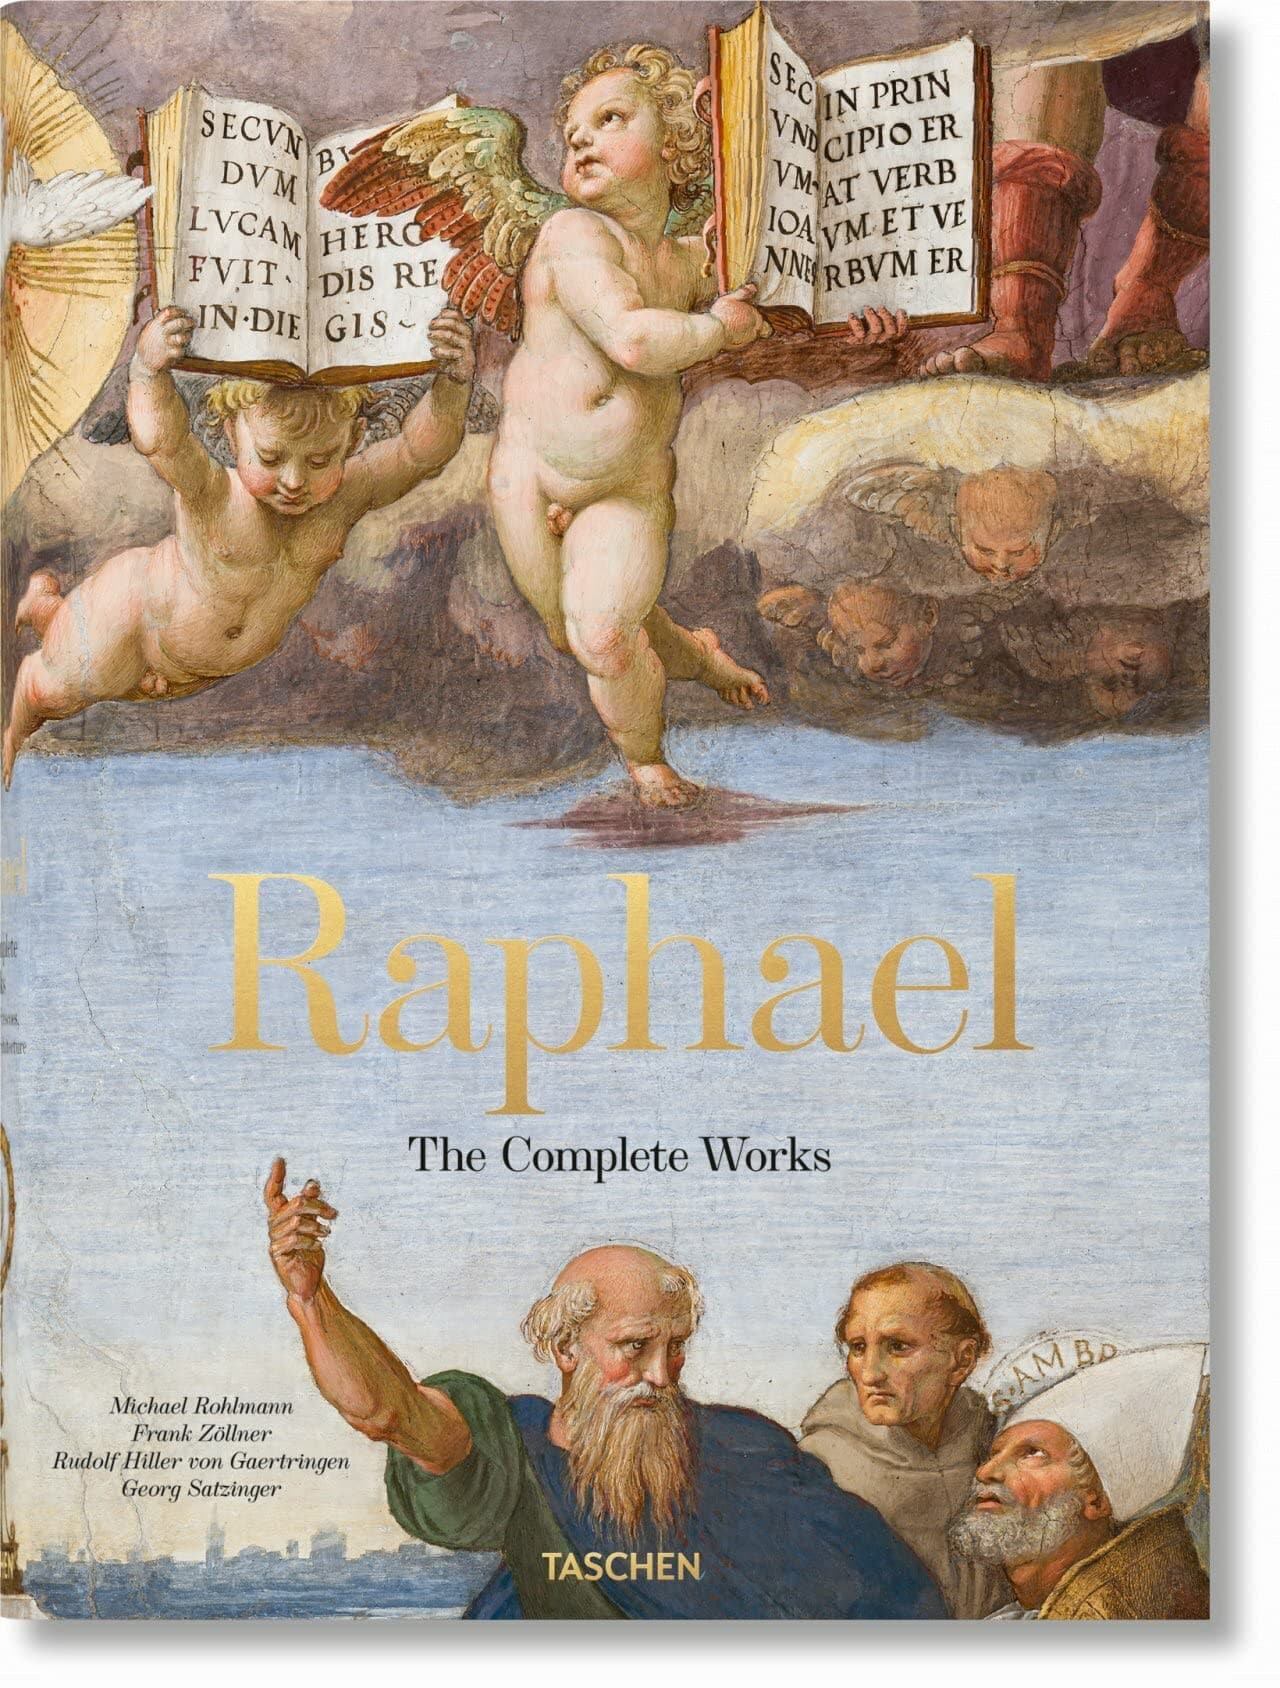 12389-raphael-the-complete-works-paintings-frescoes-tapestries-architecture-spiritual-journey-3